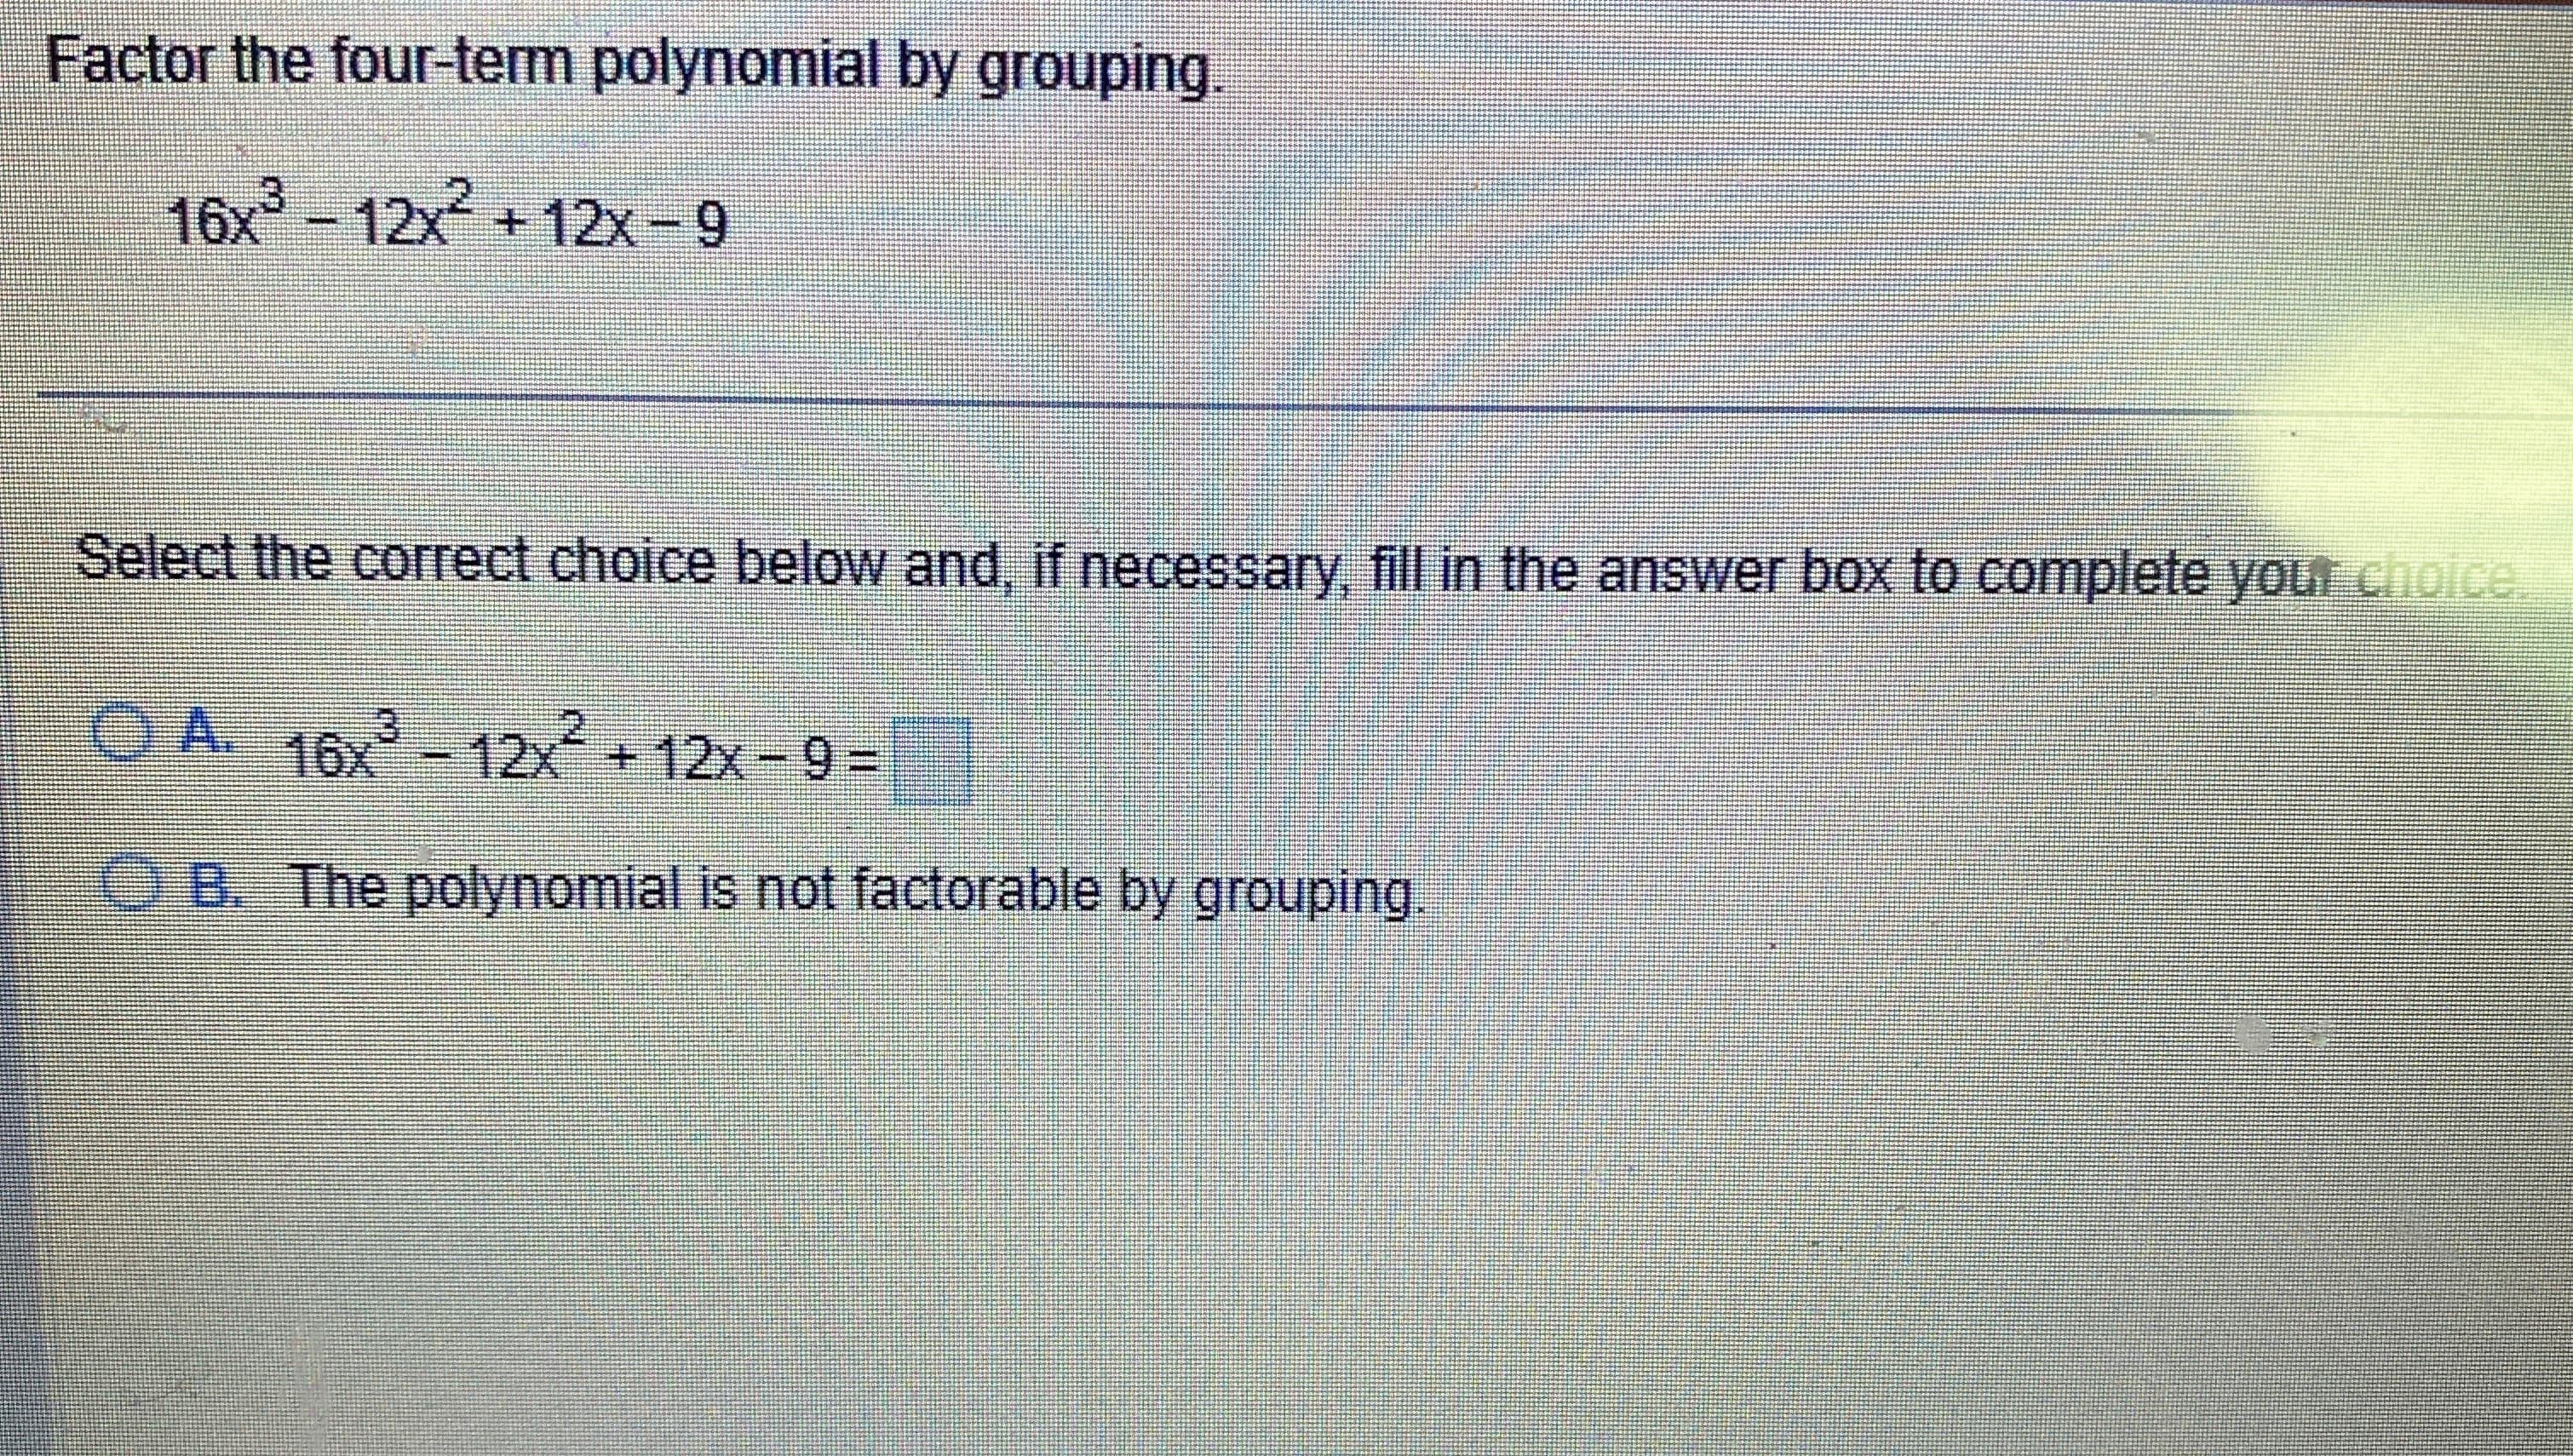 Factor the four-term polynomial by grouping.
16x³-12x2² +12x-9
Select the correct choice below and, if necessary, fill in the answer box to complete your choice.
ⒸA. 16x³-12x² + 12x-9=
B. The polynomial is not factorable by grouping.